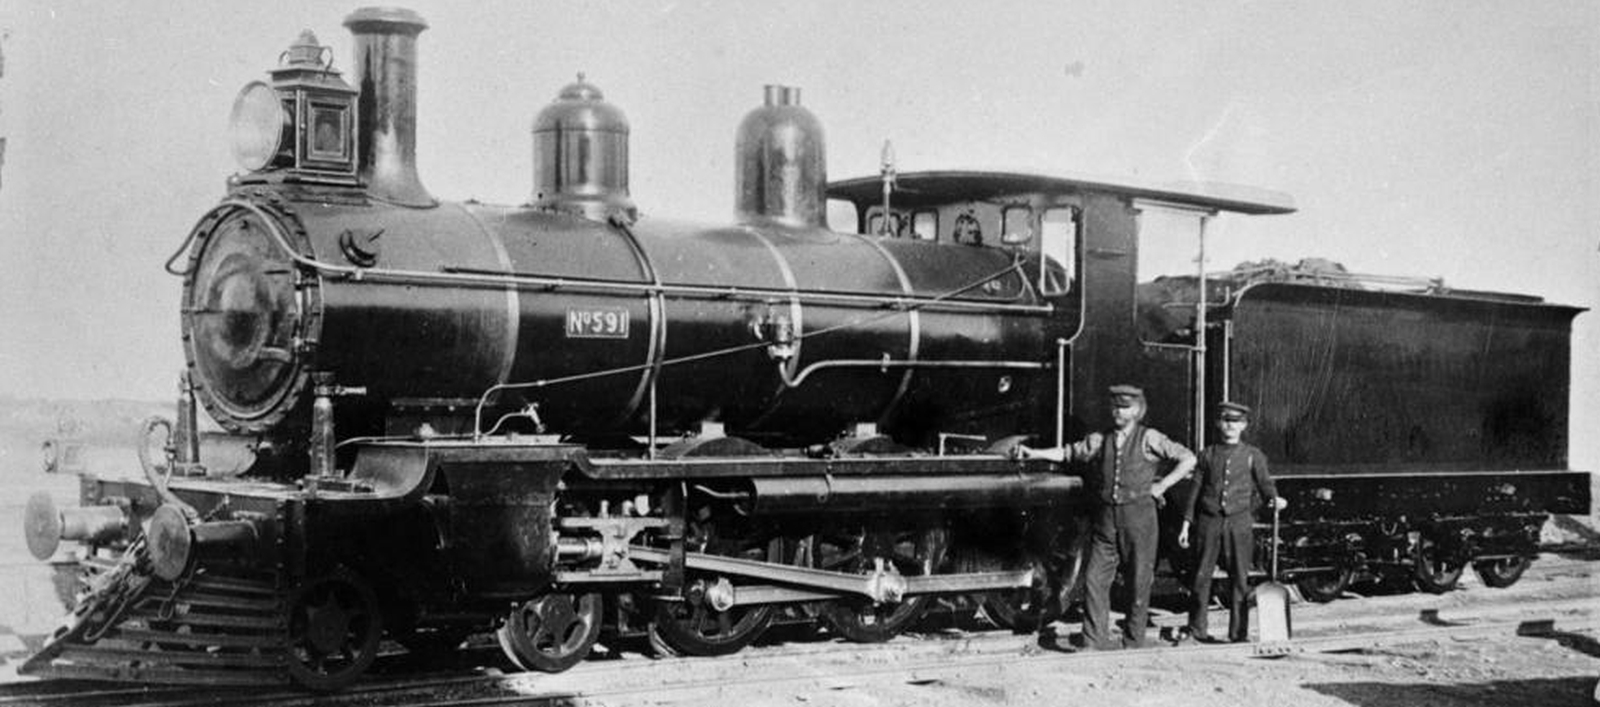 No. 591 in 1912 with crew